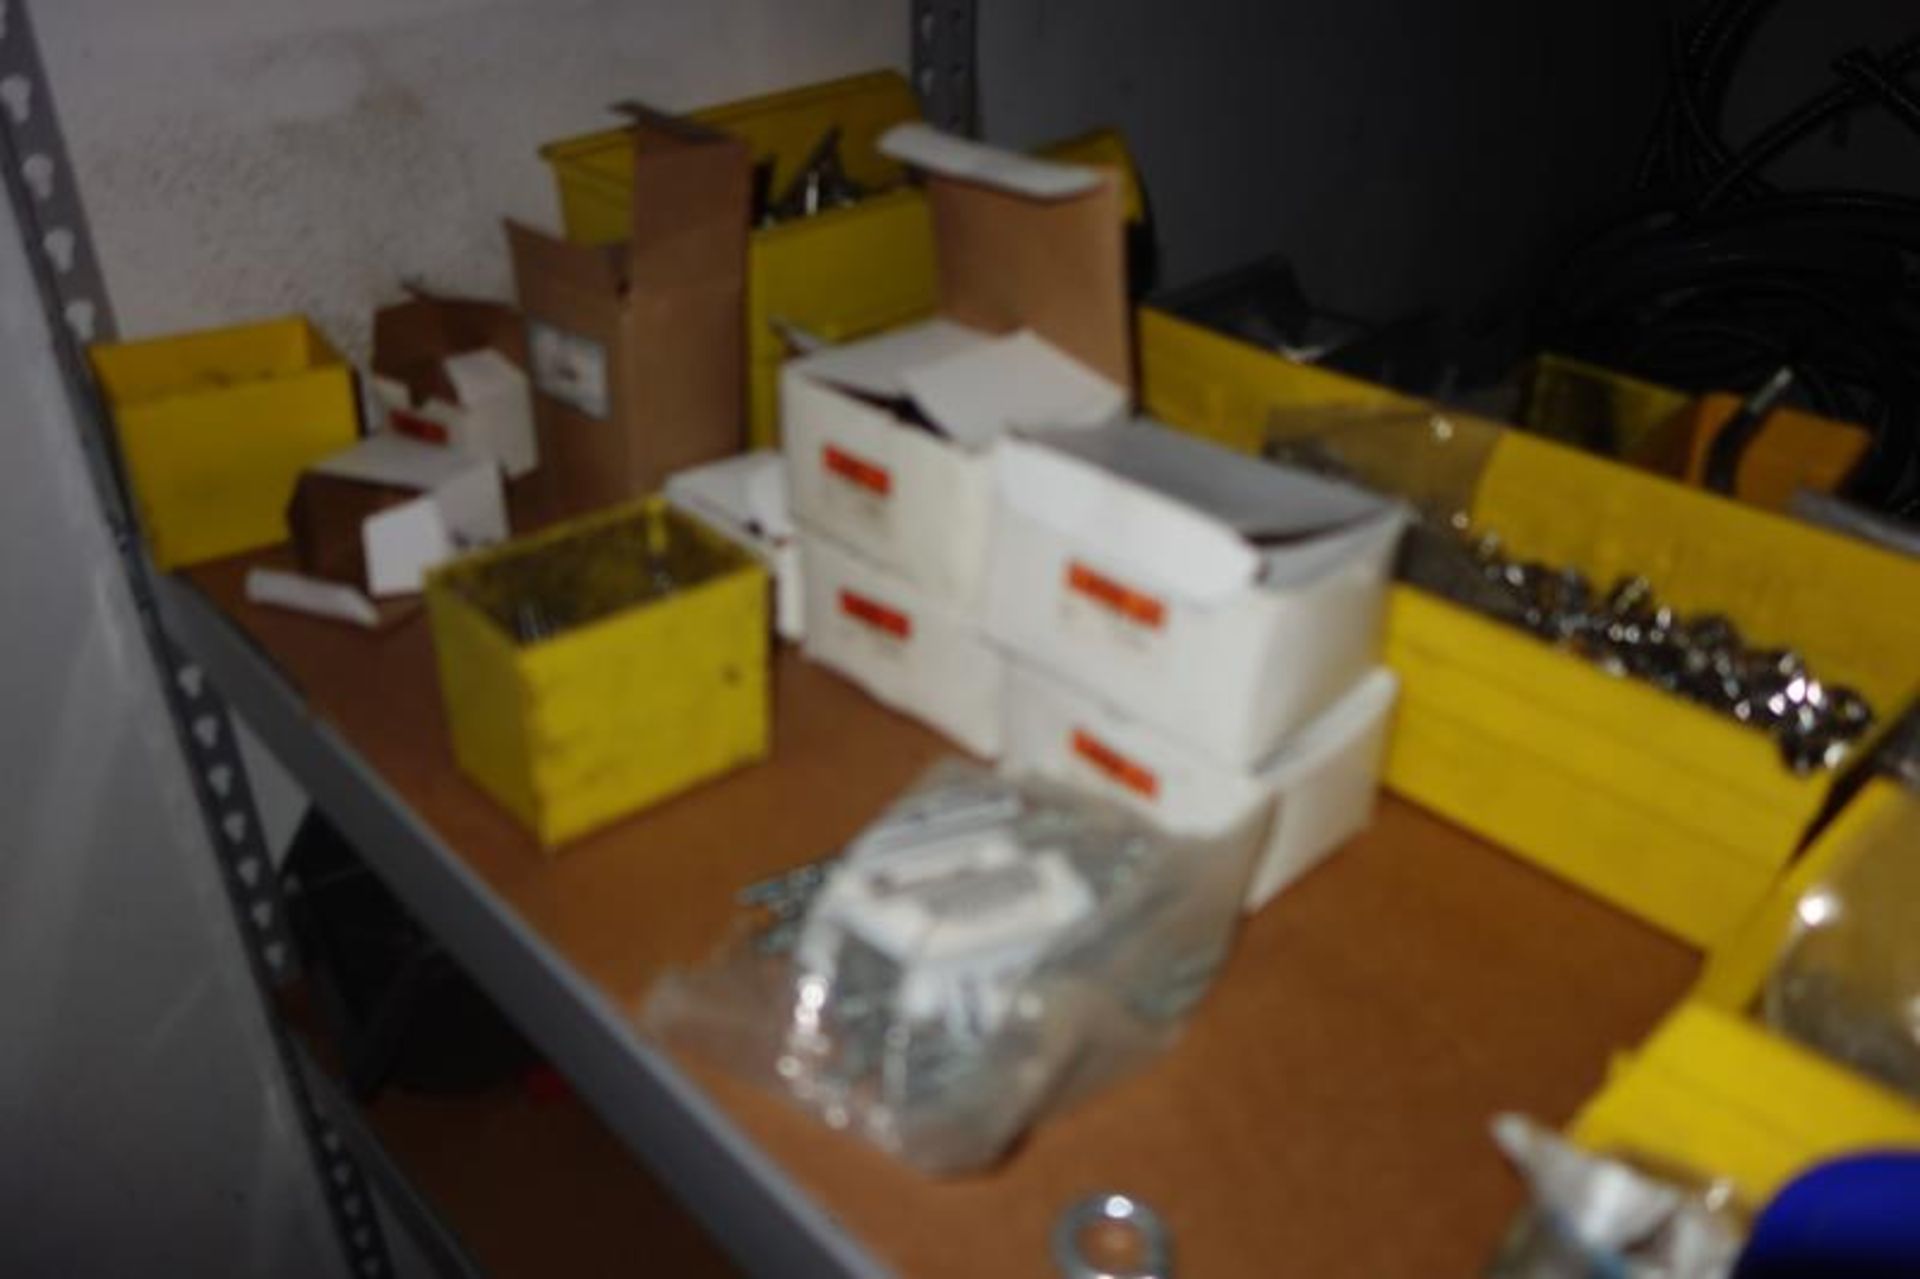 Contents of Parts Room - Hardware / Conduit - Image 15 of 20